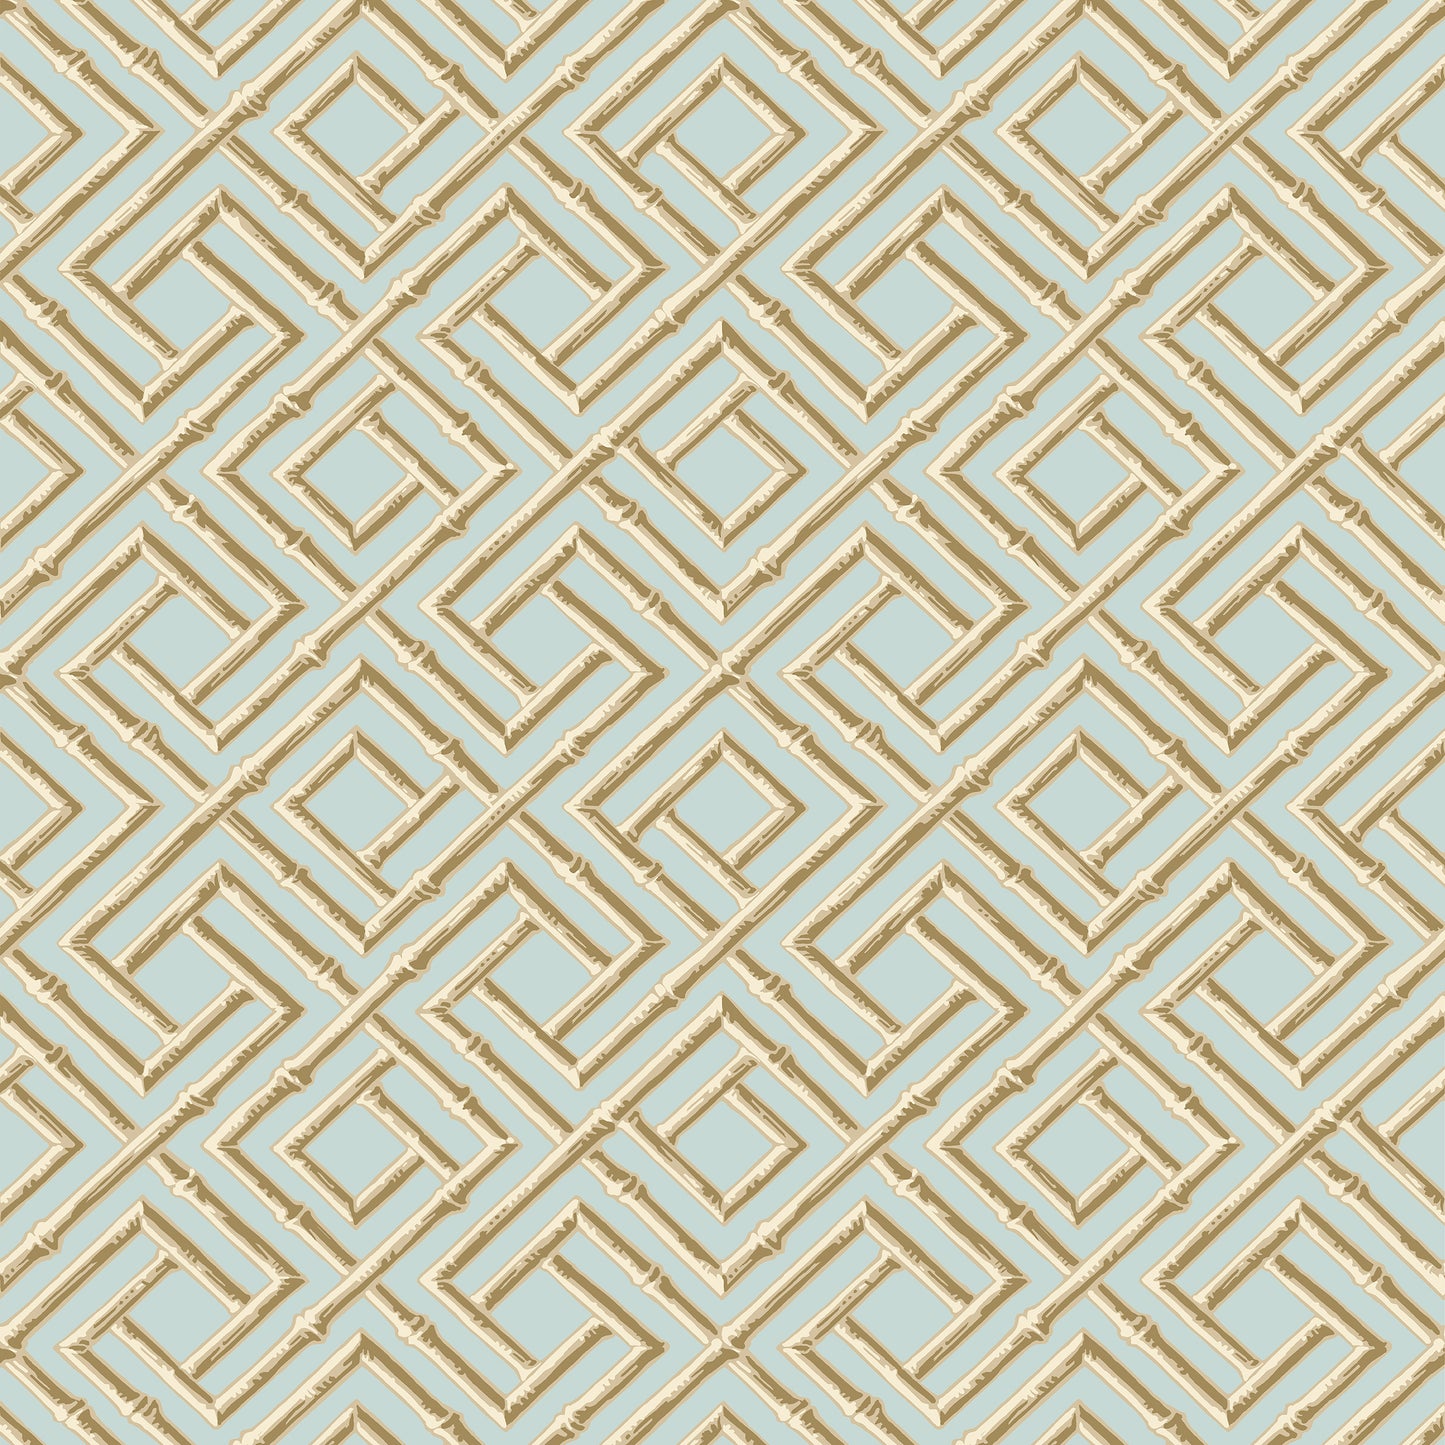 Purchase Thibaut Wallpaper Item T42046 pattern name French Lattice color Blue and Beige. 